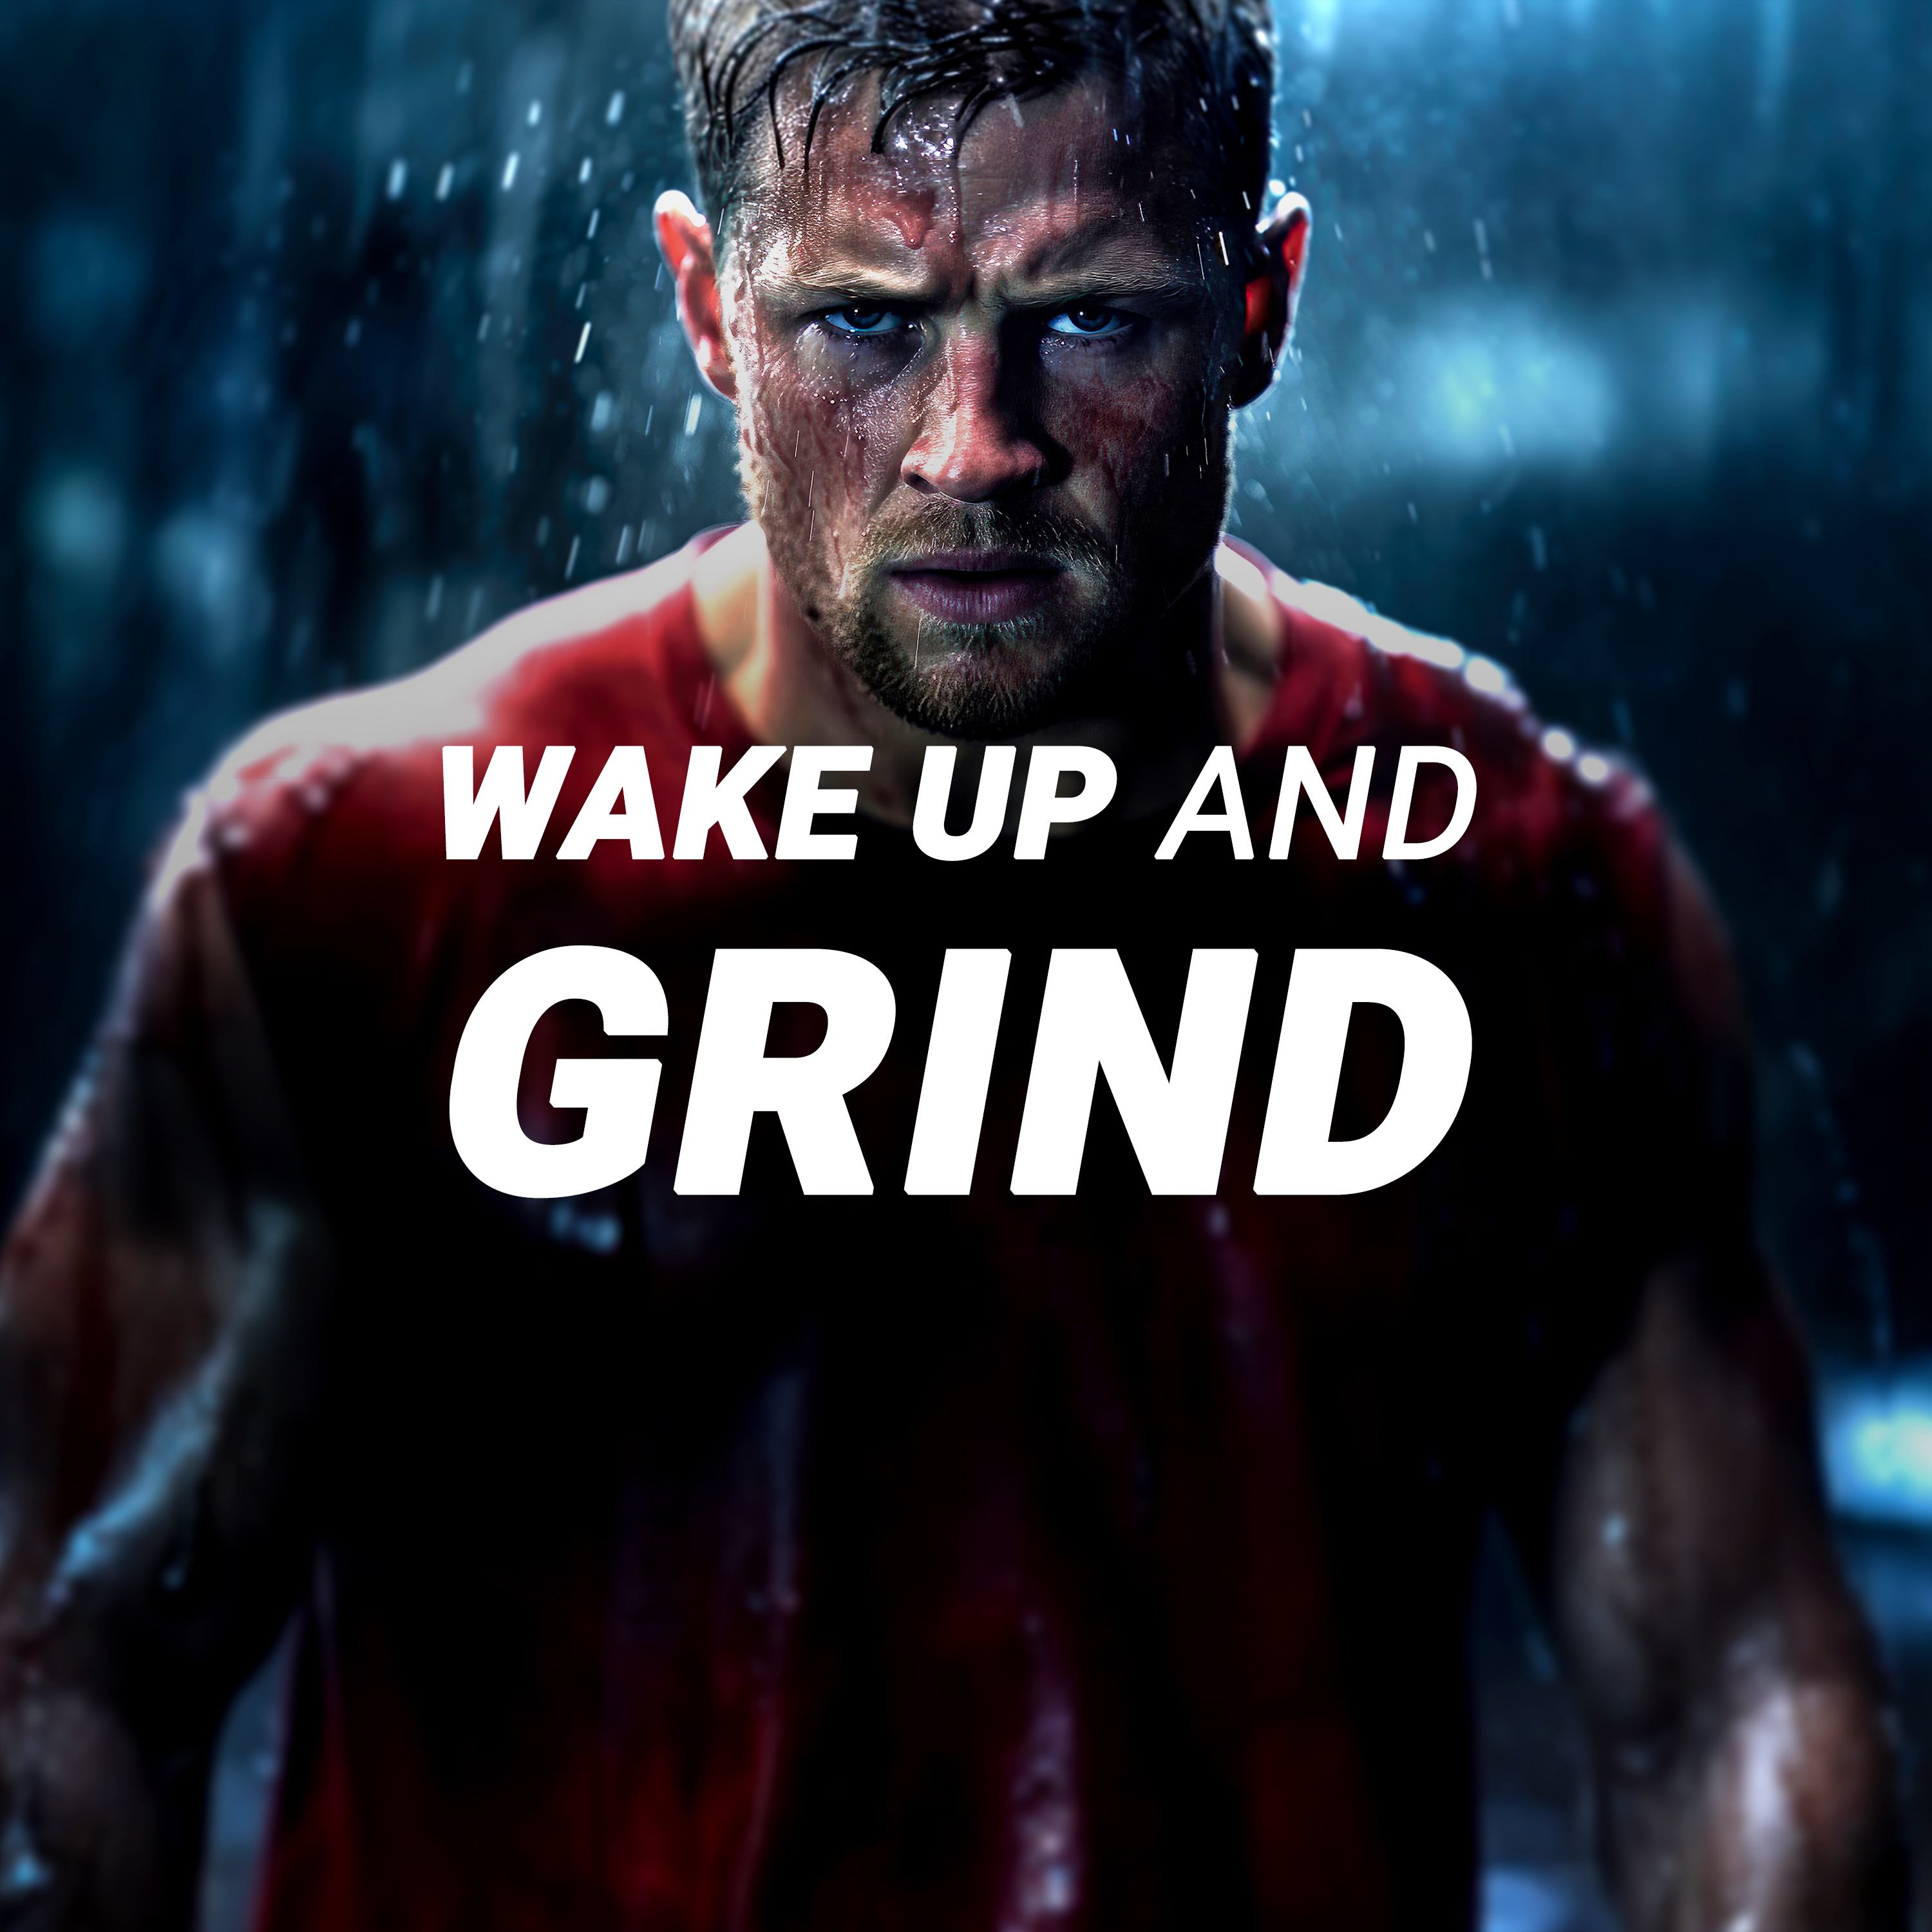 WAKE UP AND GRIND